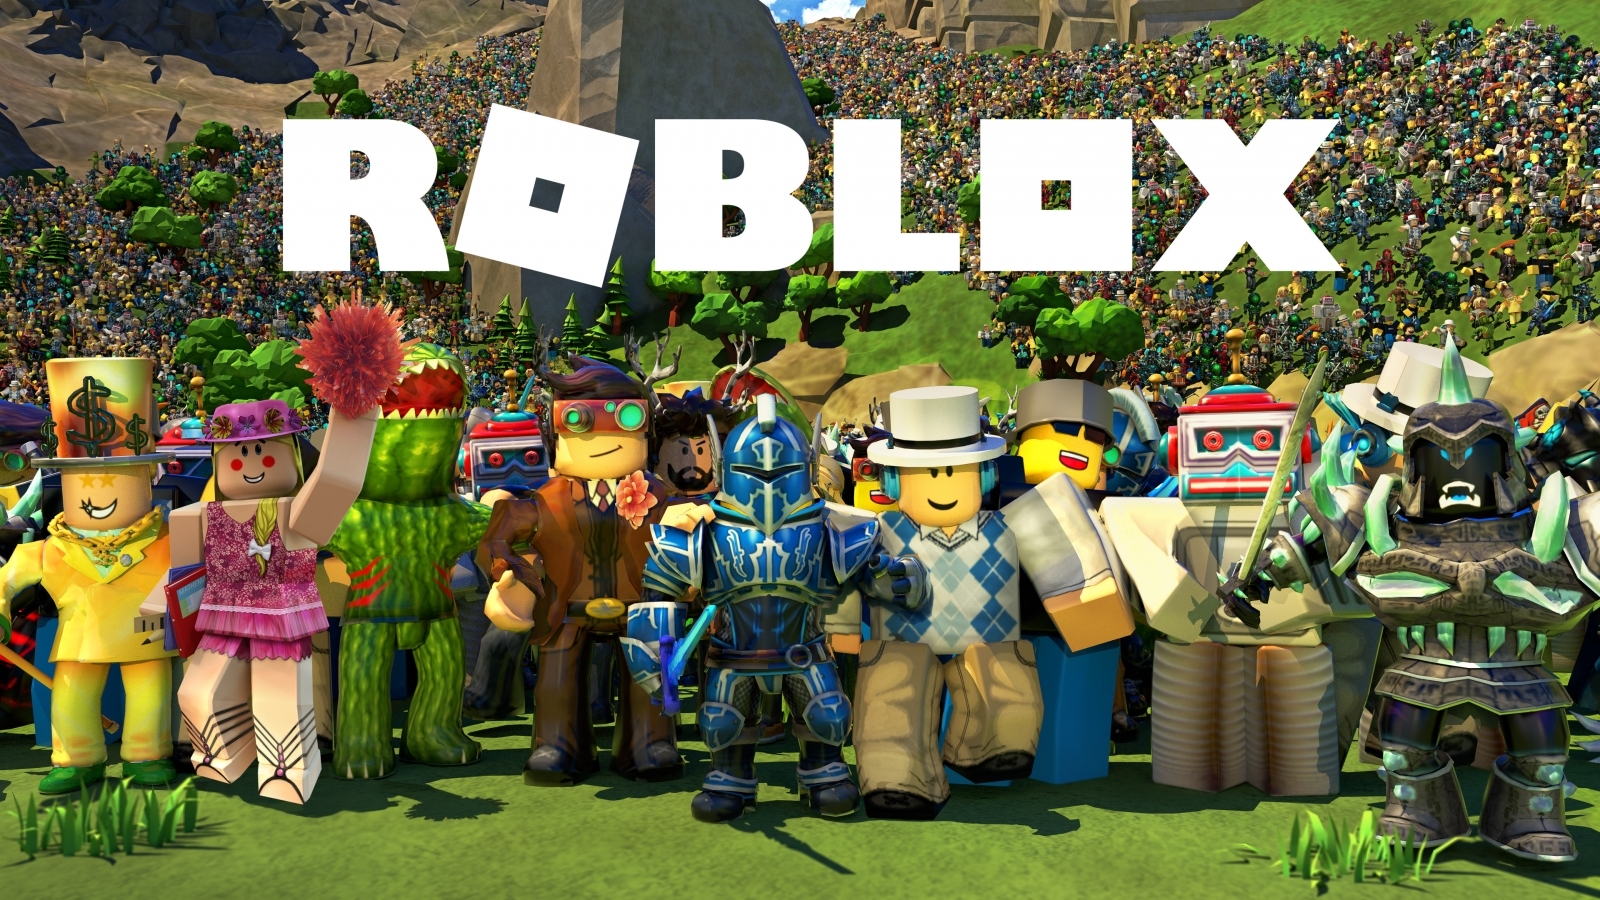 download game roblox for windows 7